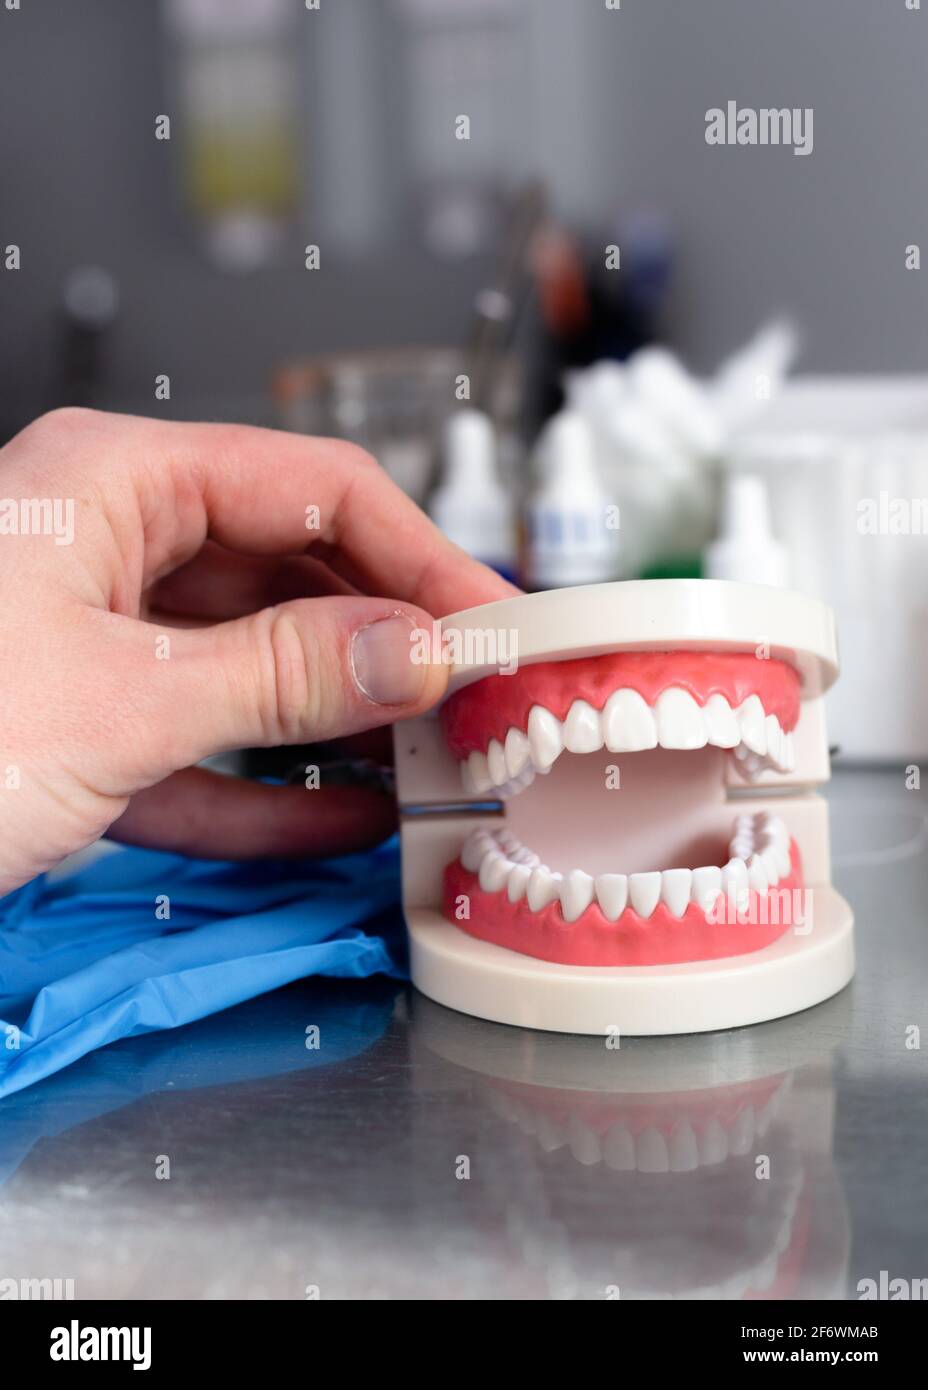 Mock up jaw with teeth on table in dental office Stock Photo